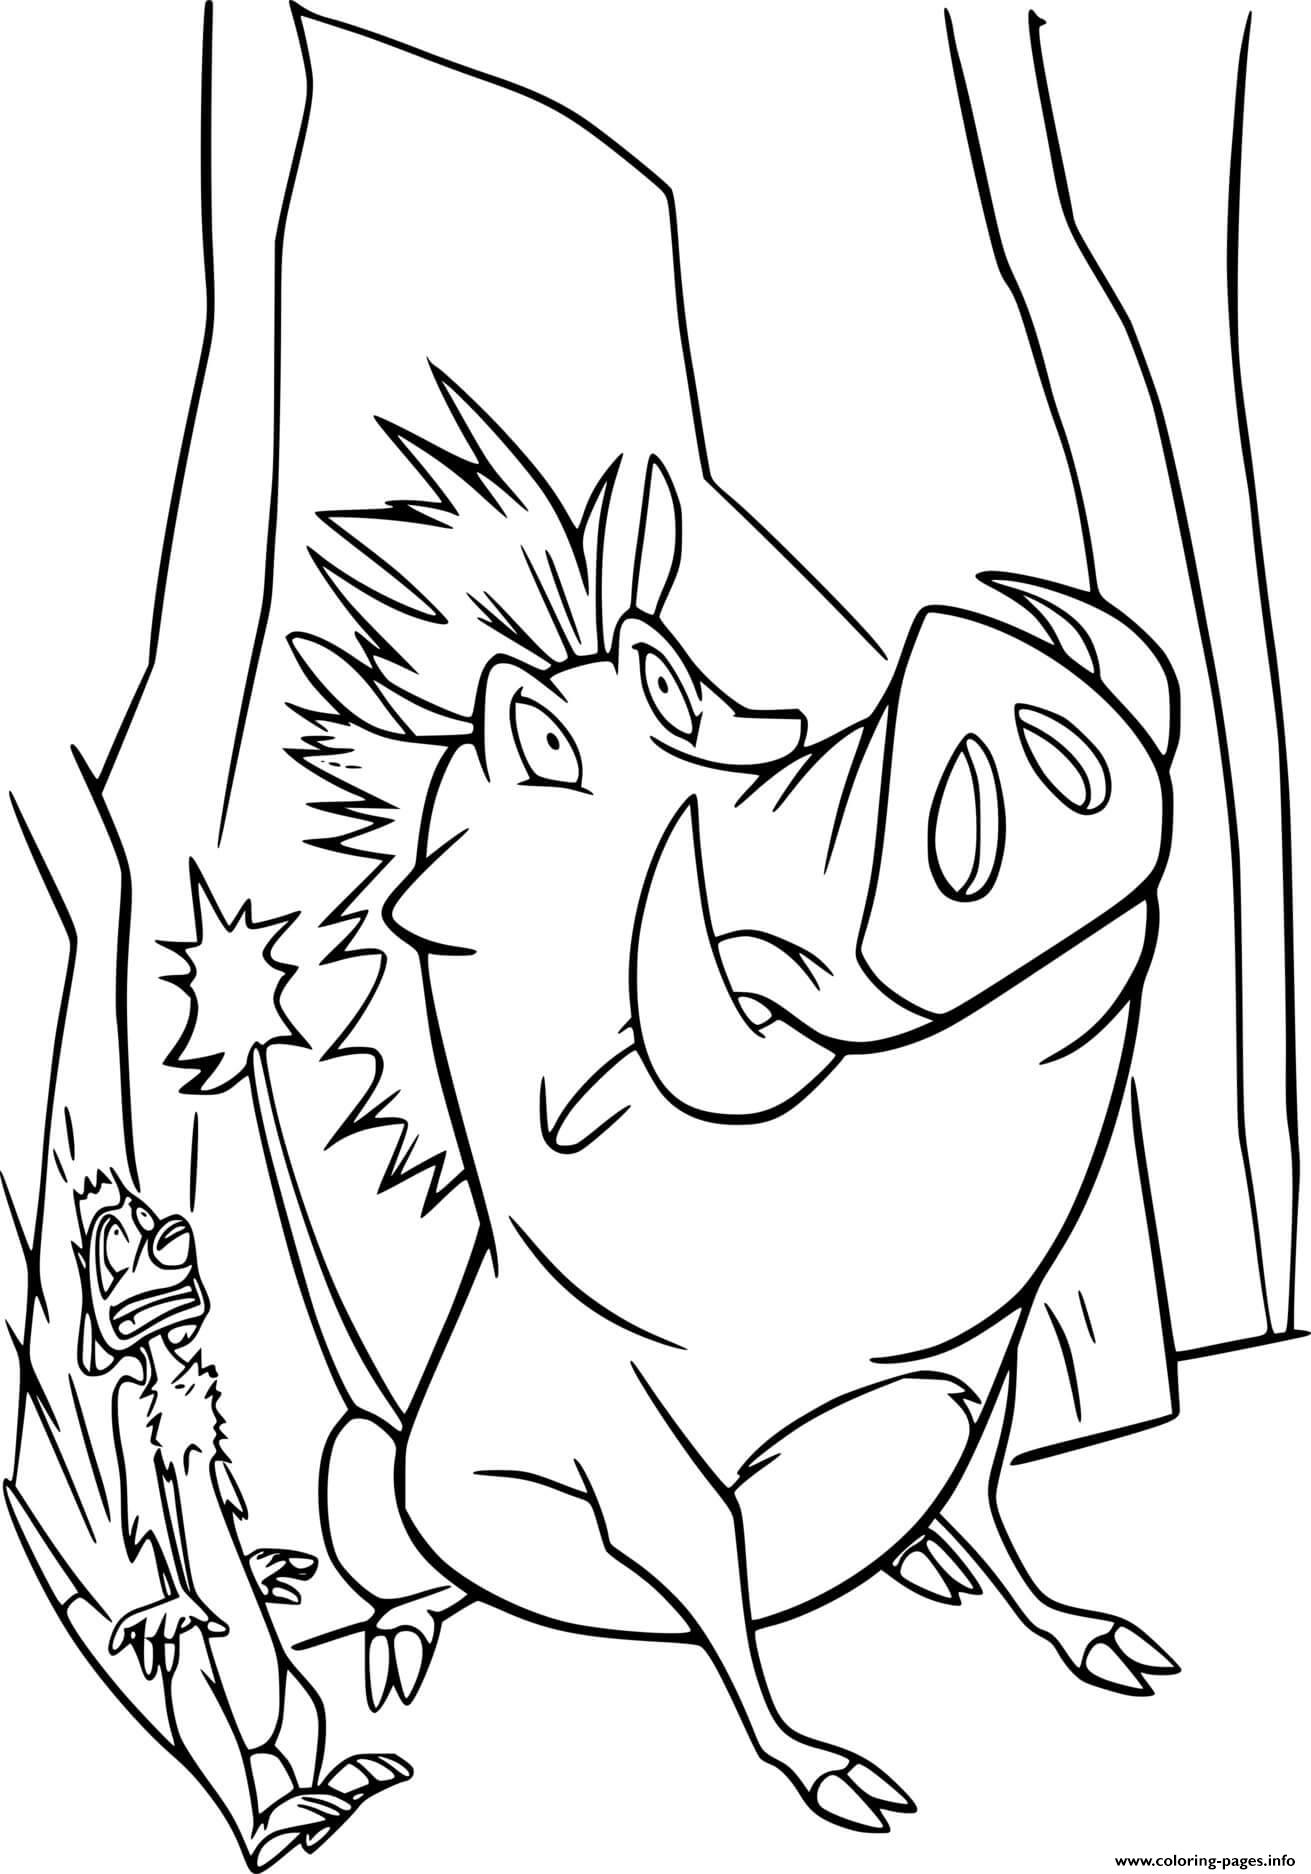 Timon And Pumbaa Are Scared coloring